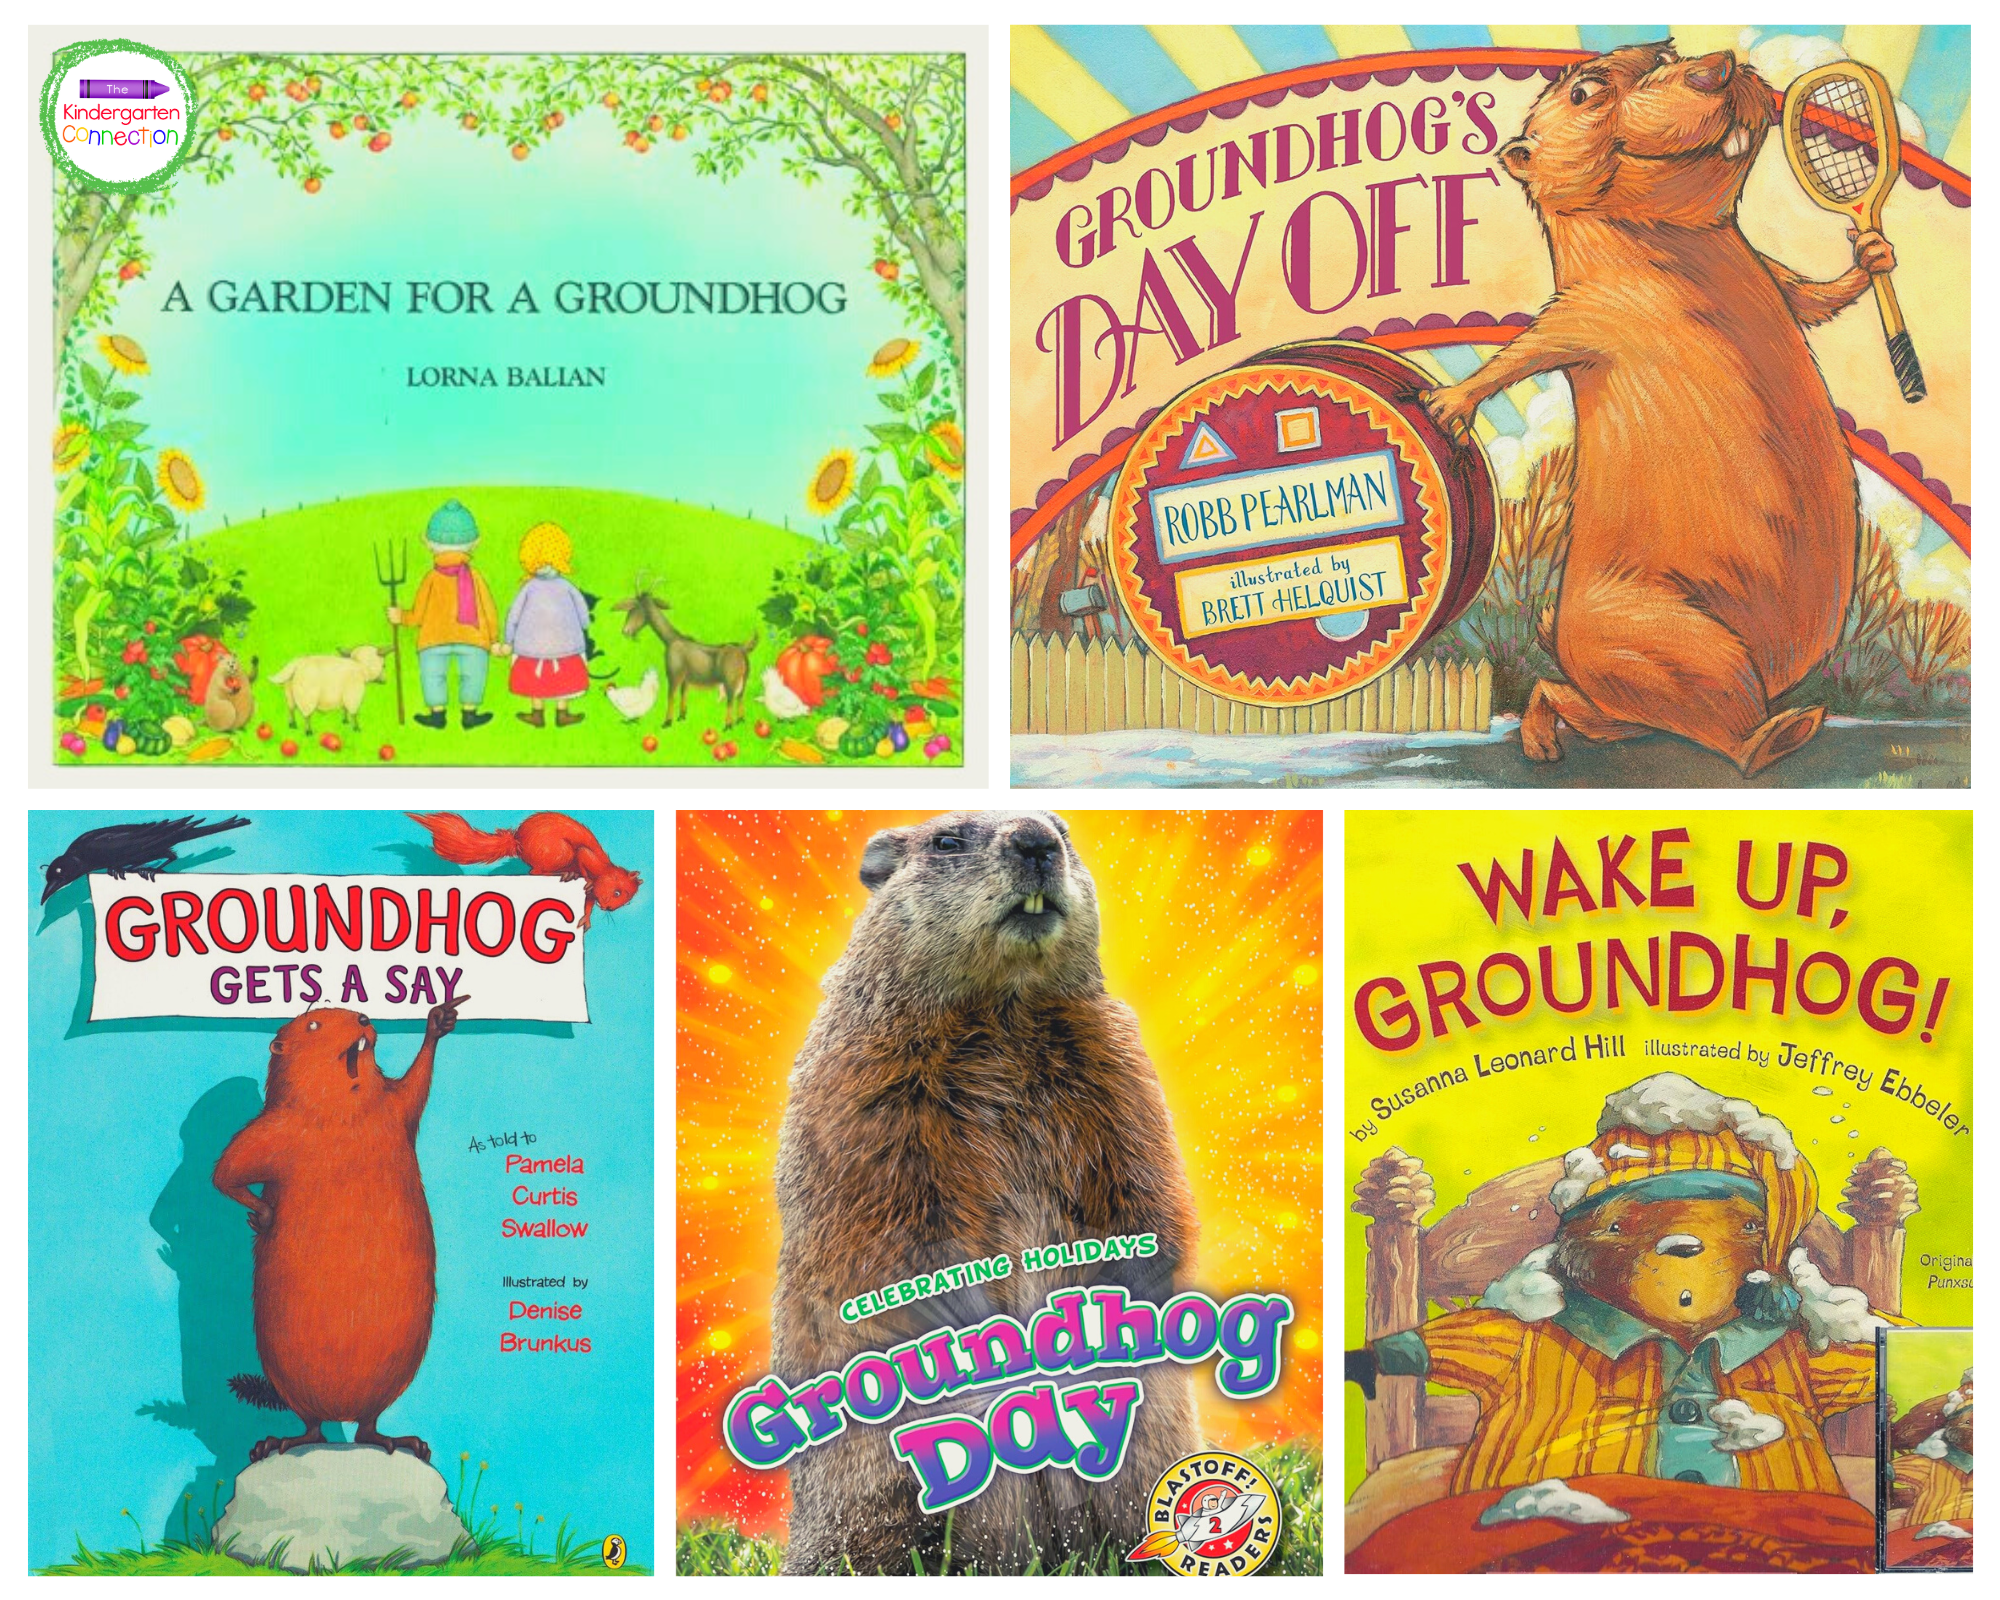 These Groundhog Day books for kids blend fun, learning, and a touch of whimsy!